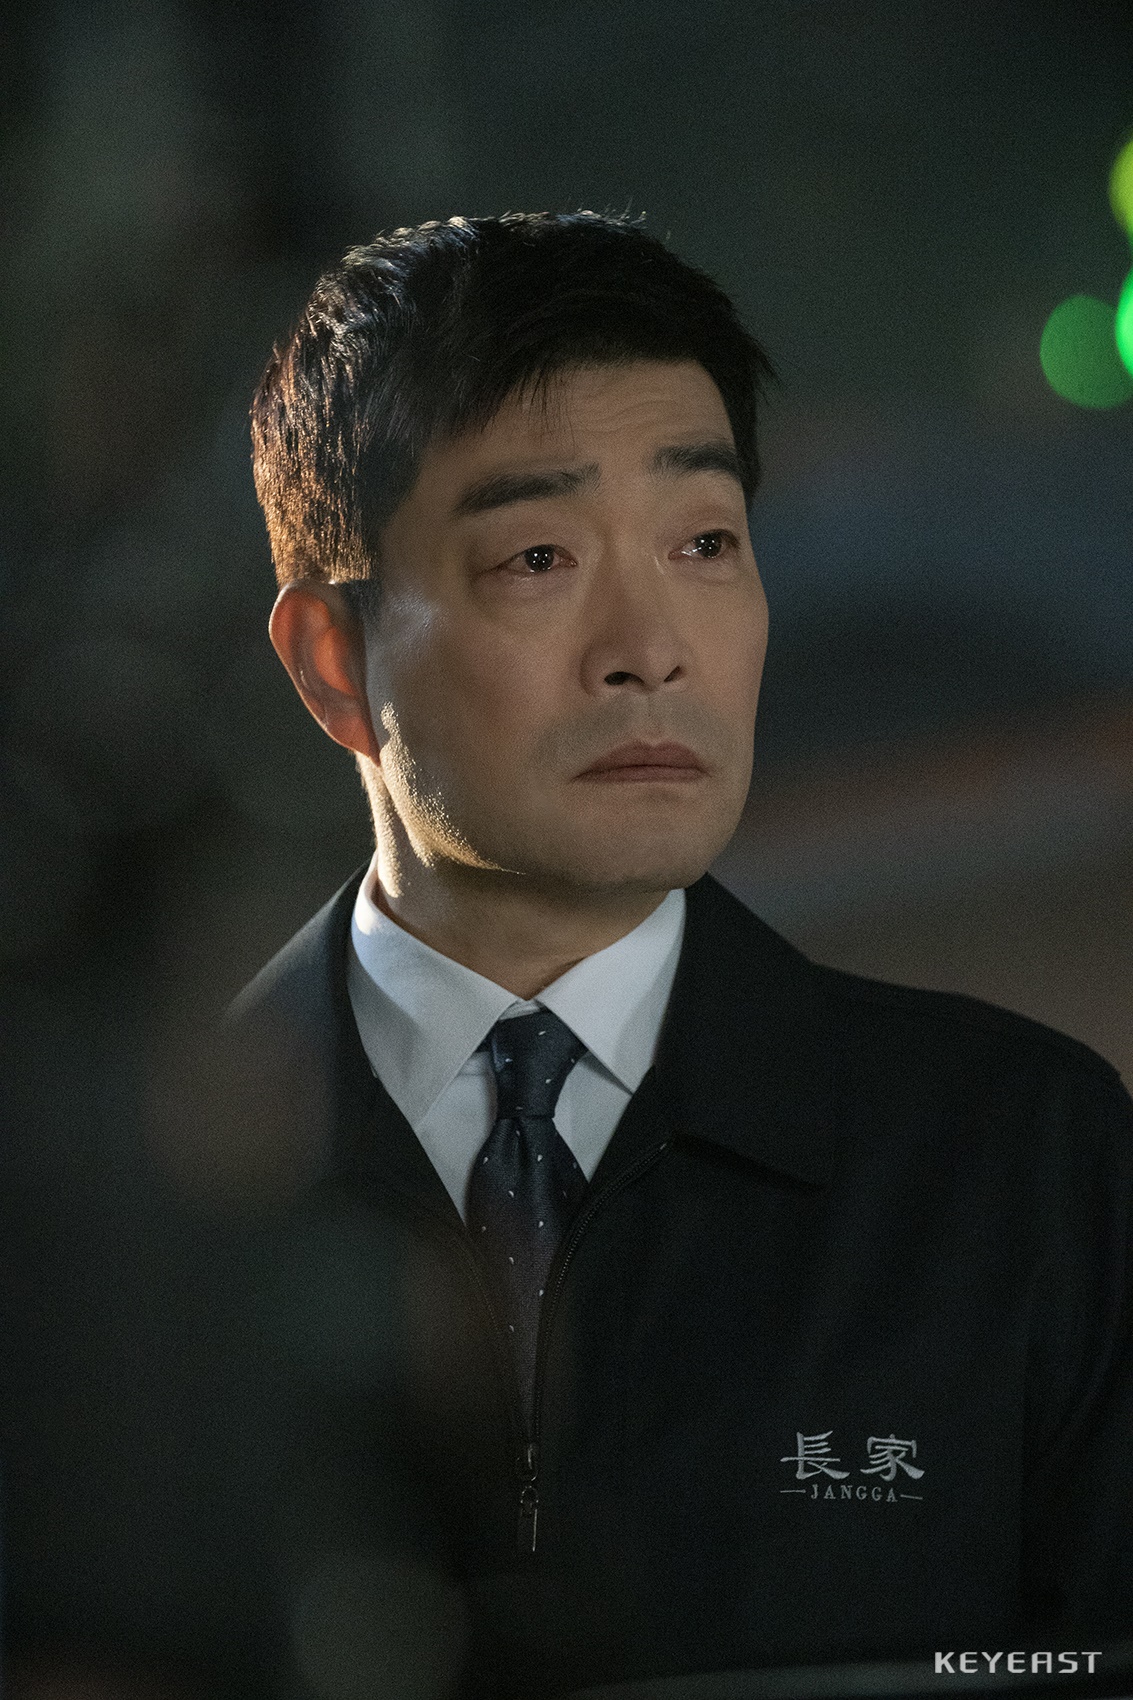 Son Hyun-joo reappeared in Itaewon Klath and captured Theater with a full presence.Son Hyun-joo made a special appearance as Park Sung-yeol, the father of Park Seo-joon, in the early part of JTBCs gilt drama Itaewon Klath, which enriched the narrative of Park Sae and increased the immersion of the drama.Son Hyun-joo, who re-appeared in Itaewon Klath on the 20th, left the end of the film, proved his name value with a luxury act that made the size of the role colorless.In the last 15 episodes, a scene was drawn in which Park Sae was in an accident and wandered through the scene, meeting with his father Park Sung-yeol in his dream.Park Sung-yeol was a warm father who still loved and loved his son in his dreams.The heart-wrenching rich reunion scene added a deep look and delicate look of Son Hyo-jo, leaving a deep impression on viewers.Son Hyun-joos Acting interior, which is filled with Itaewon Klath, can be found in the behind-the-cut.I am sorry and sorry for my son who has lived hard without my father, and I am grateful for his hard life.In addition, it makes the hearts of those who see in the way of cheering silently while holding the Roy who chose life at the crossroads of death.Viewers who watched the broadcast on this day said, Park Seo-joon - Son Hyun-joo Actor Acting Biggest!, Son Hyun-joo Acting was the best, Son Hyun-joo.Acting crazy and so on.Son Hyun-joo, who is well received for his outstanding acting ability, is currently preparing to meet with viewers with JTBCs new Mon-Tue drama The Good Detective.The Good DetectiveDetective is an exciting rhetoric that tracks a concealed truth that is too different from two different Detectives. Son Hyun-joo plays the role of the Detective Robbery Window in the 18th year armed with toughness and loyalty.It is a homicide team that catches a felon, but it is expected to reach viewers with familiar charm like a man in the city.Meanwhile, JTBCs new Mon-Tue drama The Good DetectiveDetective starring Son Hyo-jo is scheduled to air in April.iMBC Kim Hye-young  Photo Keith